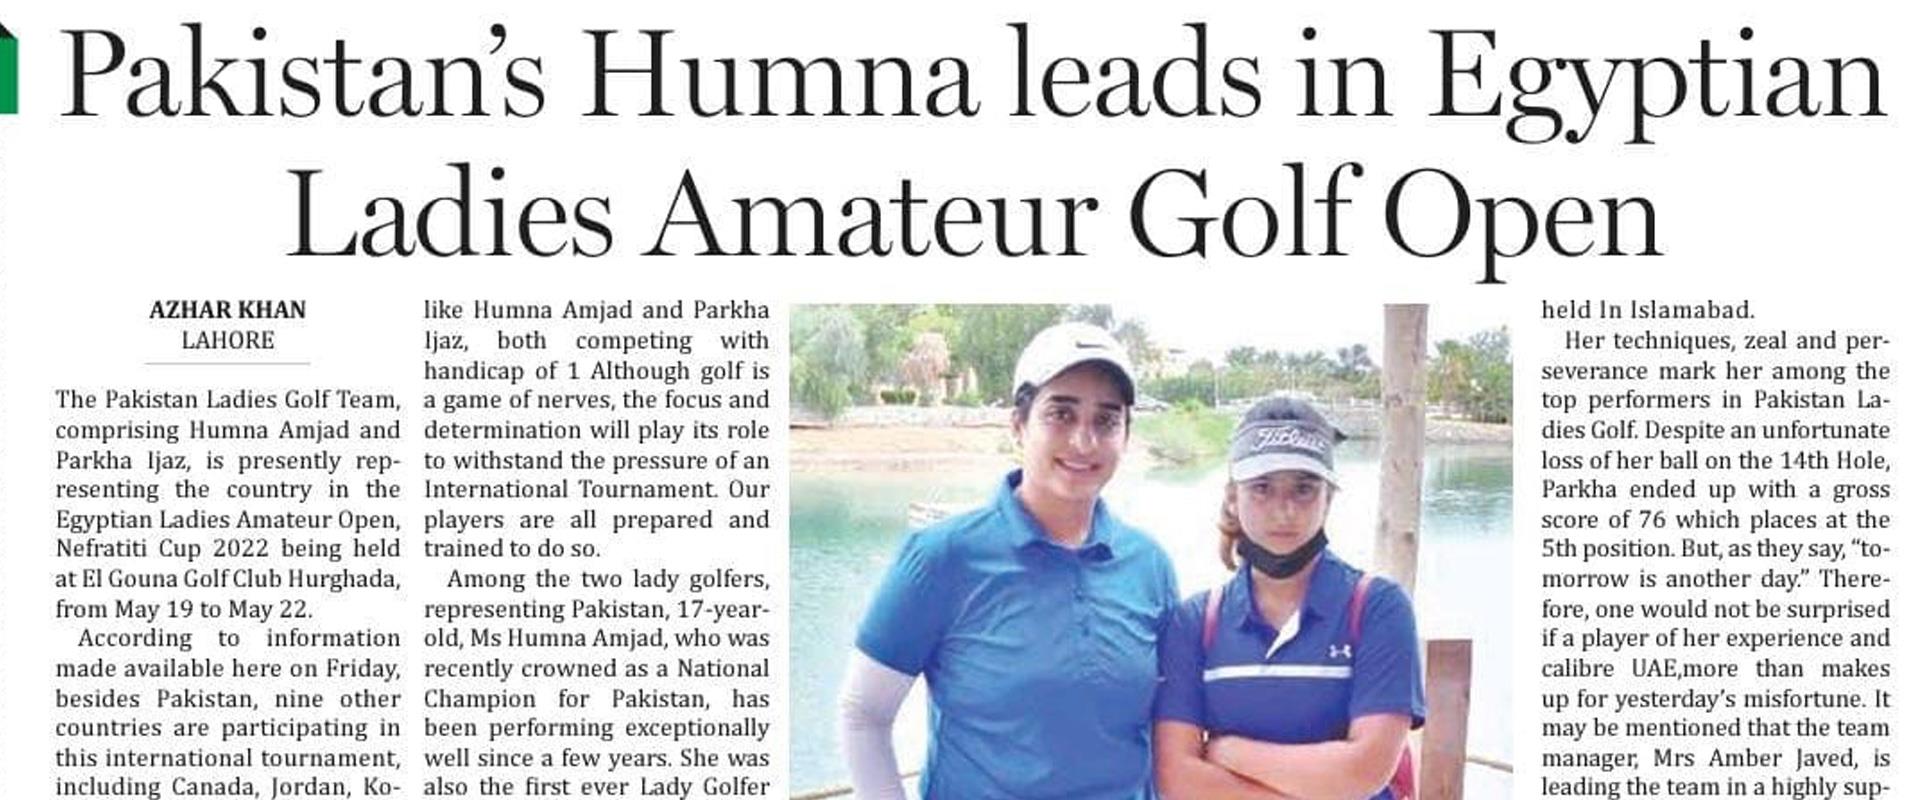 Pakistans Humna leads in Egyptian Ladies Amateur Golf Open